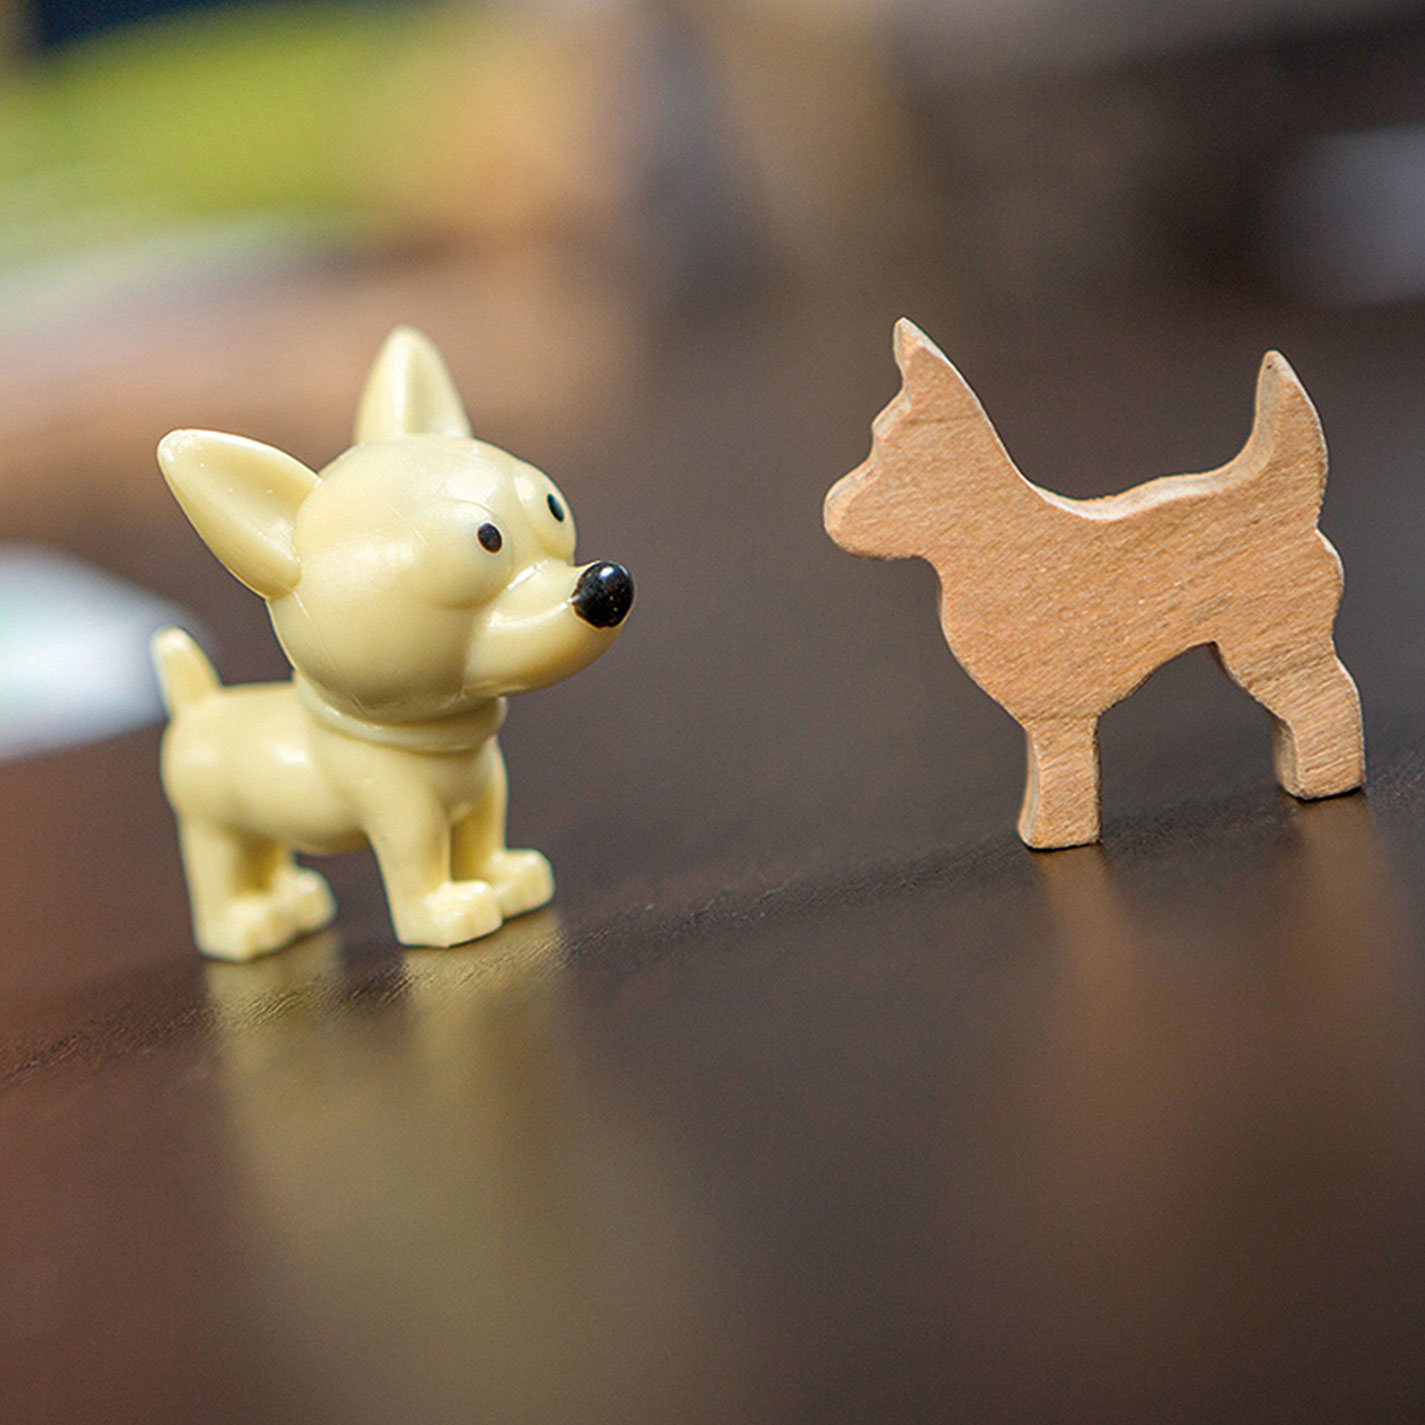 wooden dog model next to finished plastic chihuahau figure